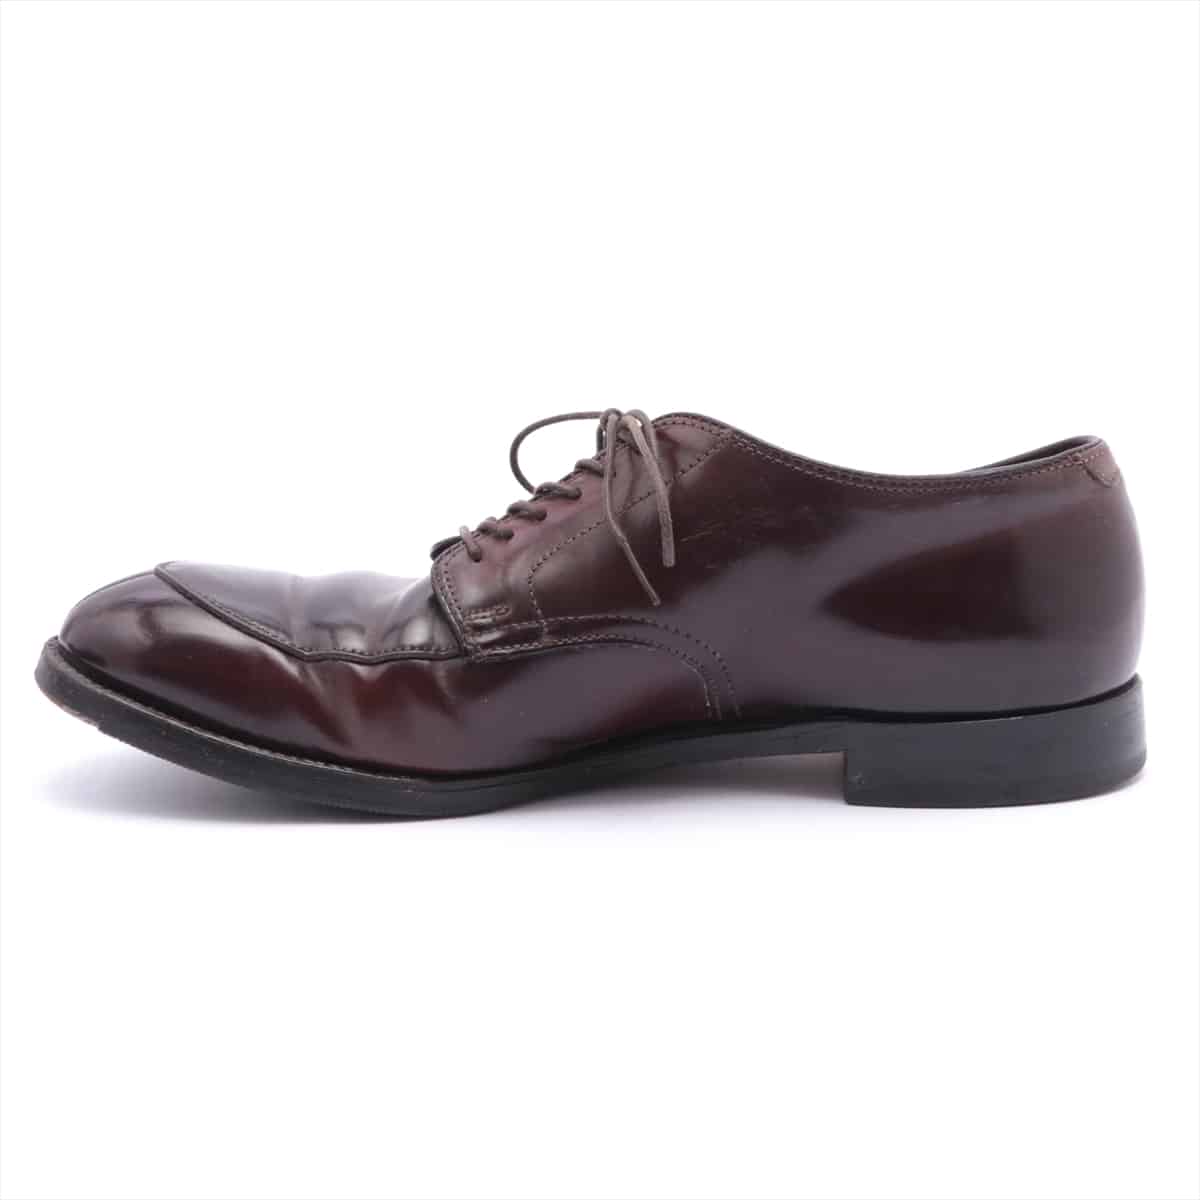 Alden Leather Leather shoes 8 1/2 Men's Brown Cordovan Resoled